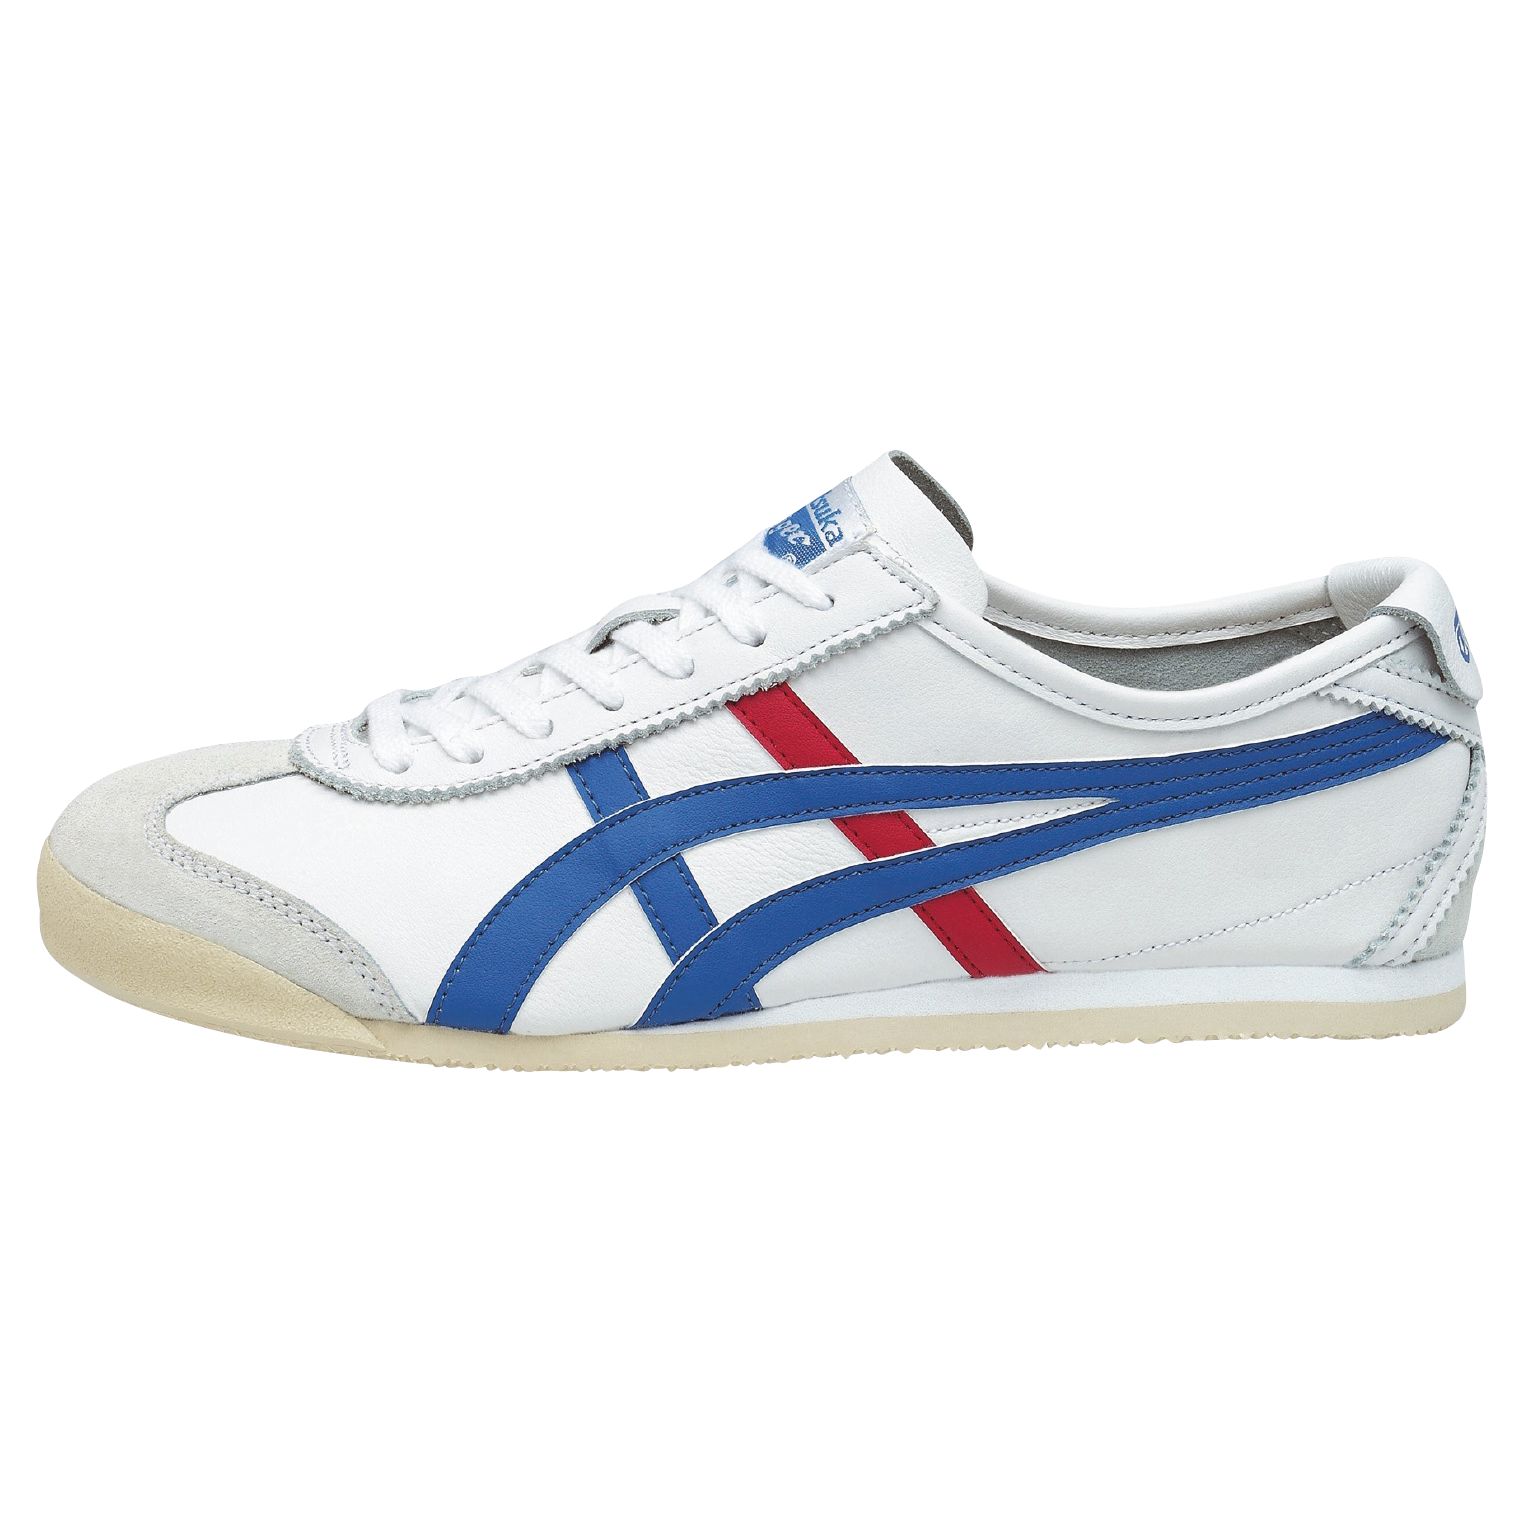 Onitsuka Tiger Mexico 66 Men's Trainers, White/Blue